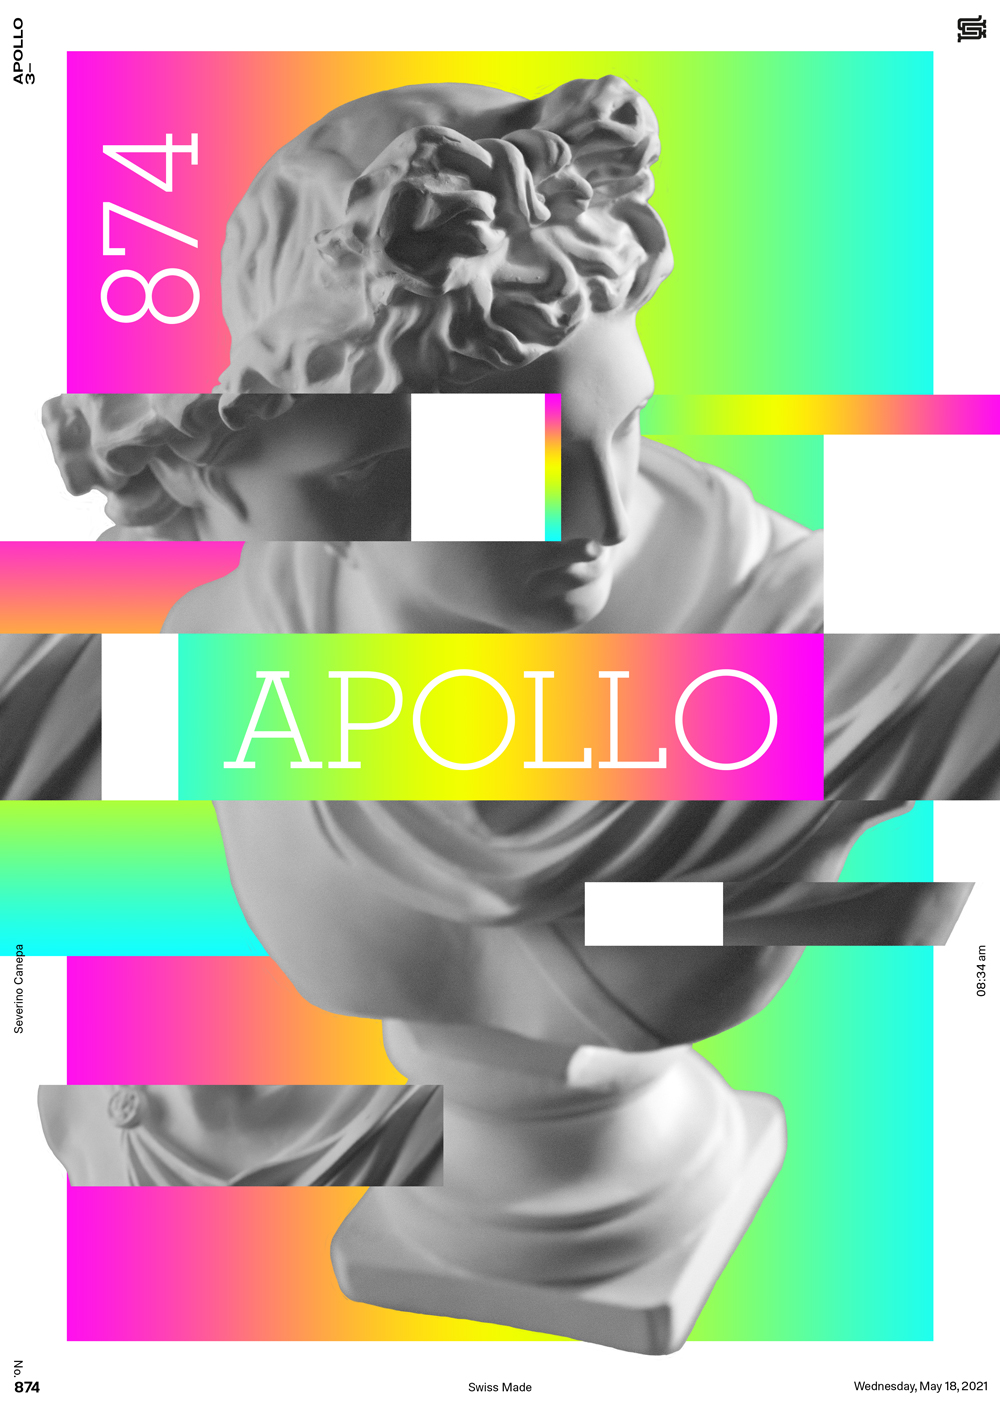 I used fake marker brushes and Apollo's Statue to design the poster number 866